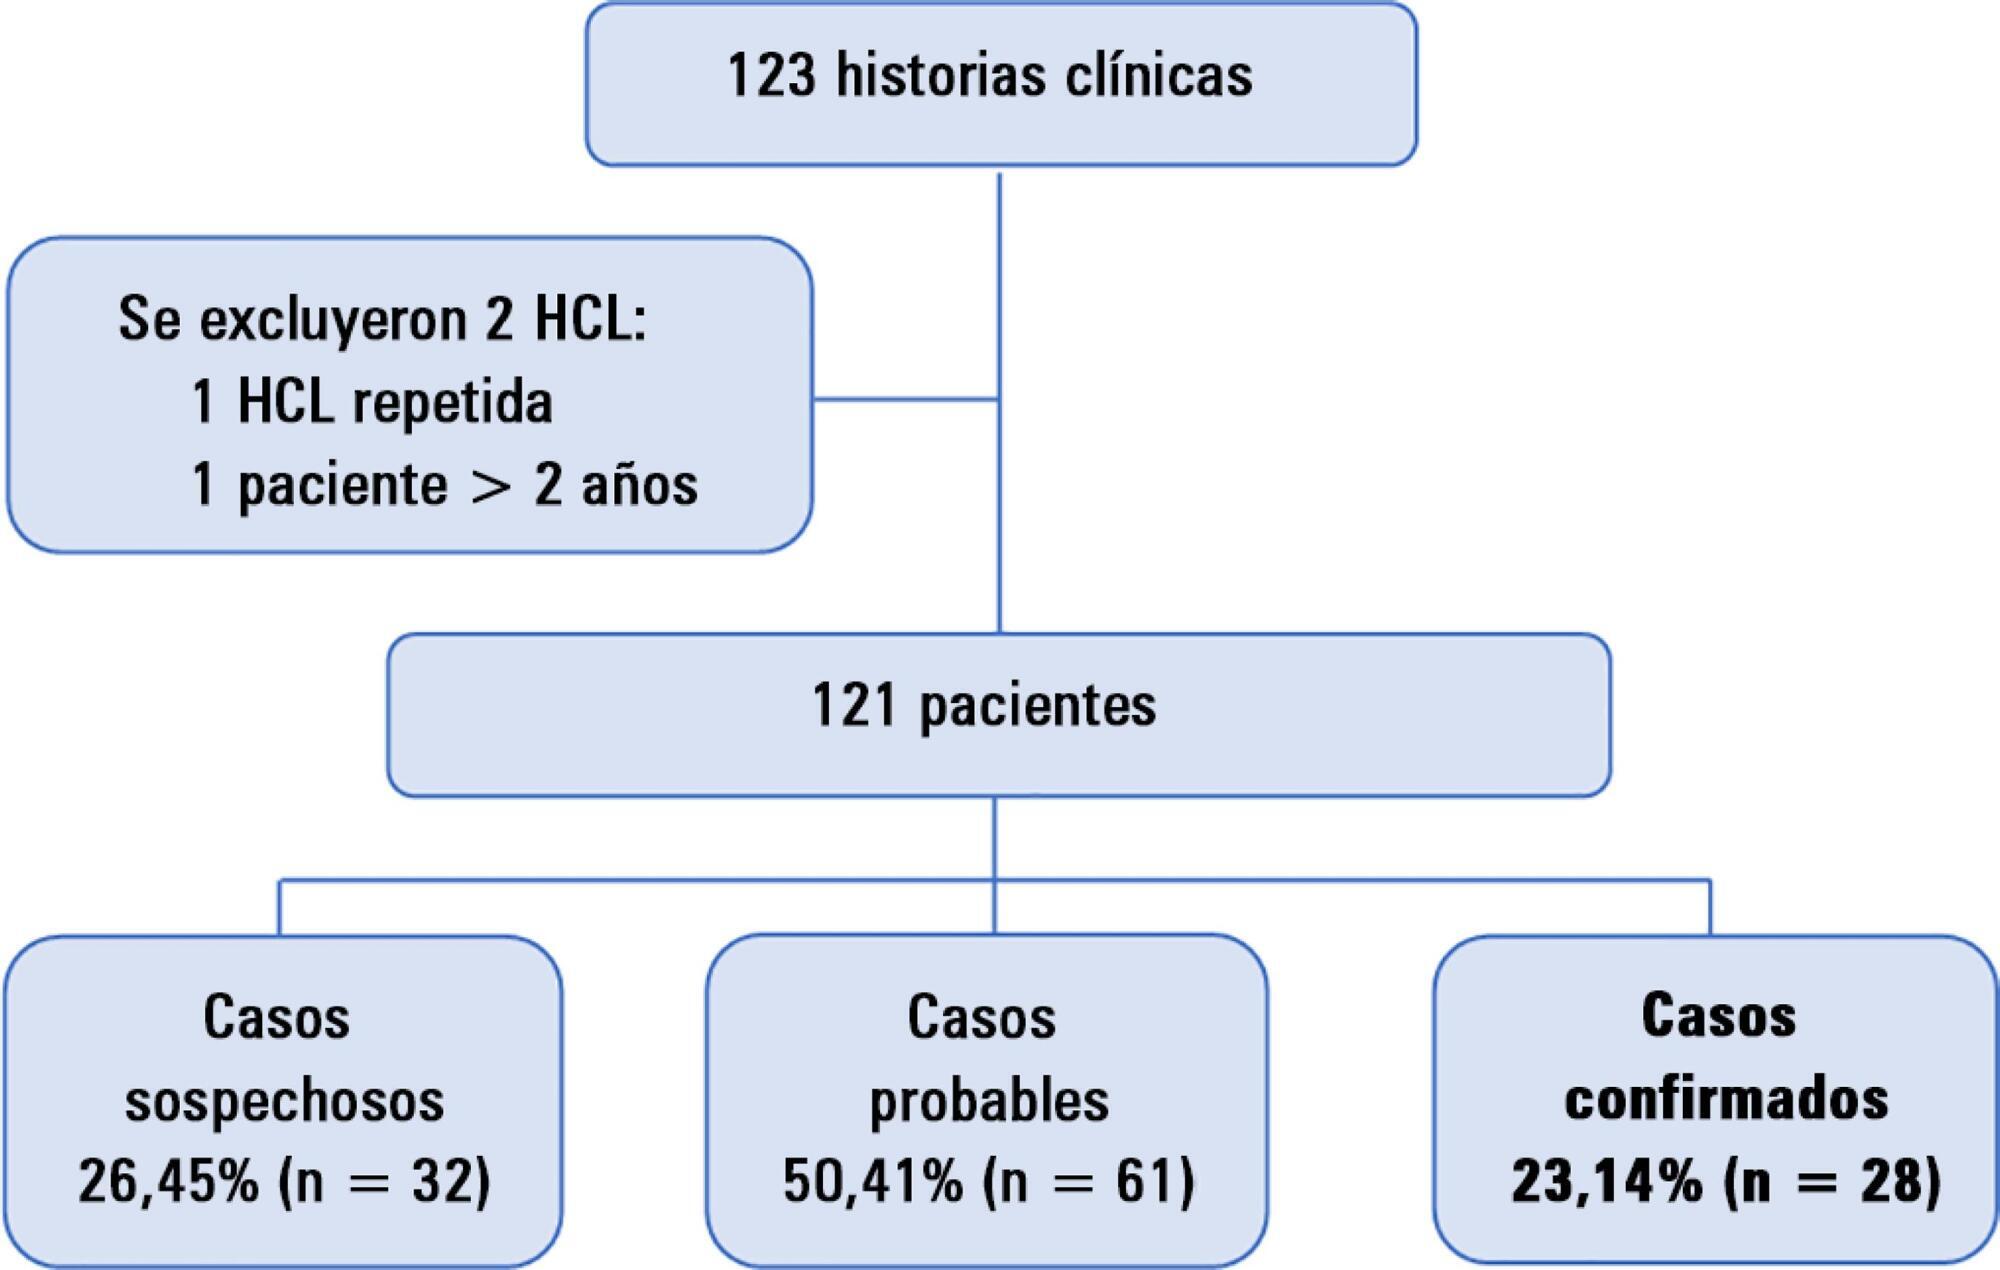 Clinical and epidemiological characteristics of whooping cough in hospitalized patients of a tertiary care hospital in Peru